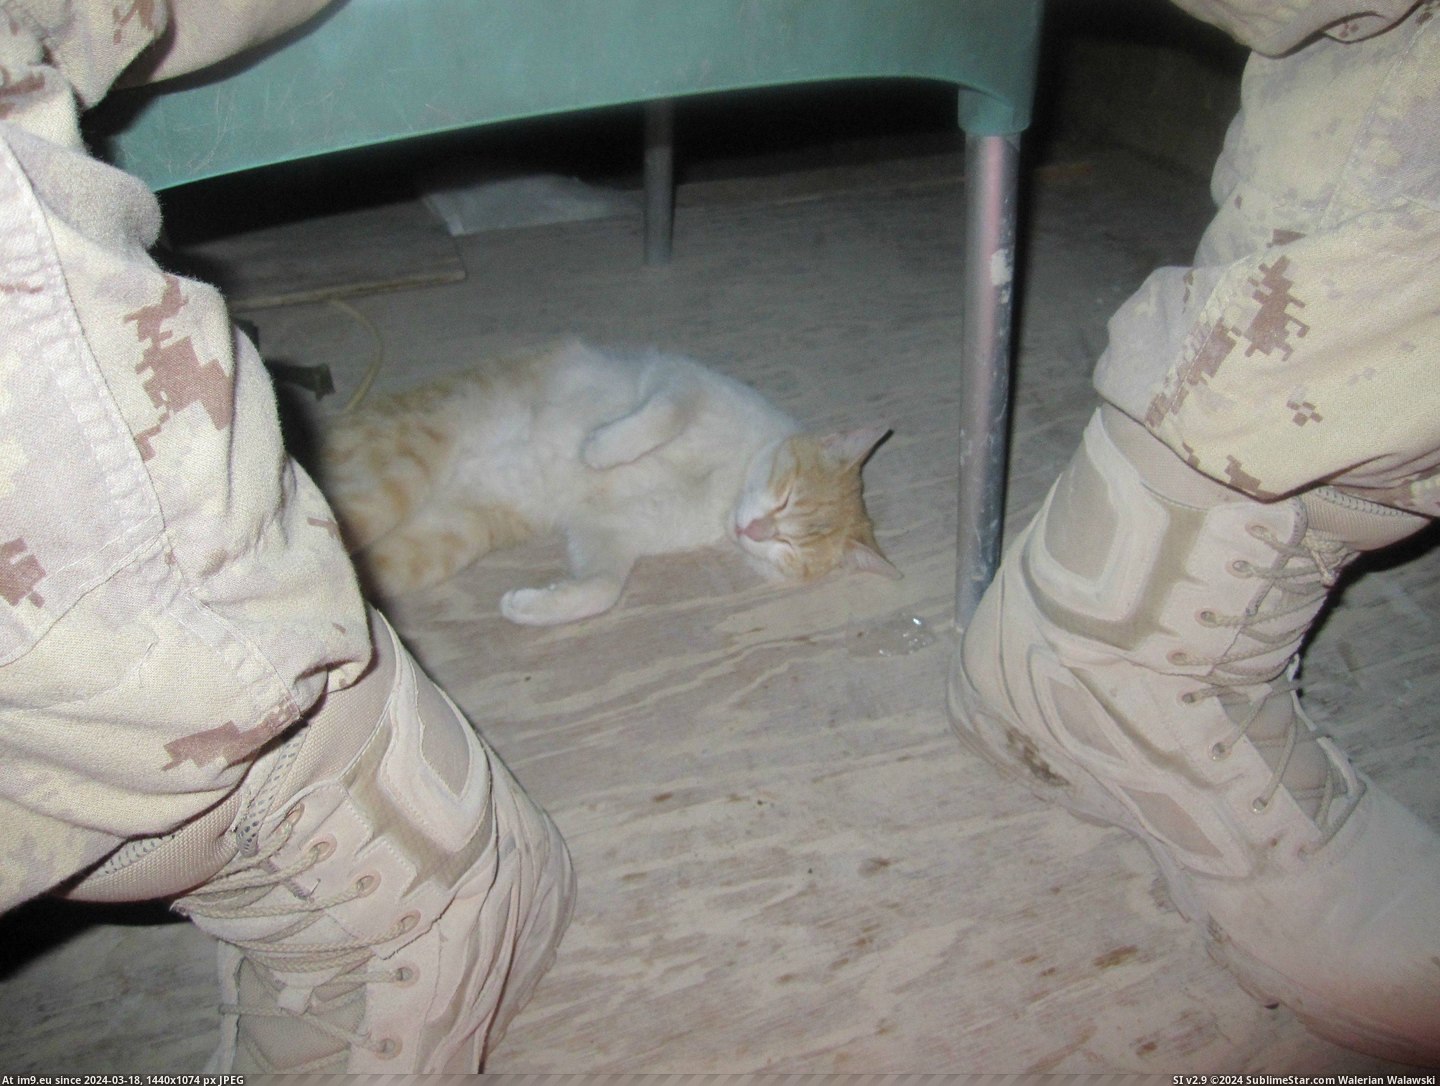 #Cats #Guard #Camp #Afghanistan #Cheetah #Tower #Helping [Cats] Tower Cheetah helping me guard my camp in Afghanistan. 4 Pic. (Image of album My r/CATS favs))